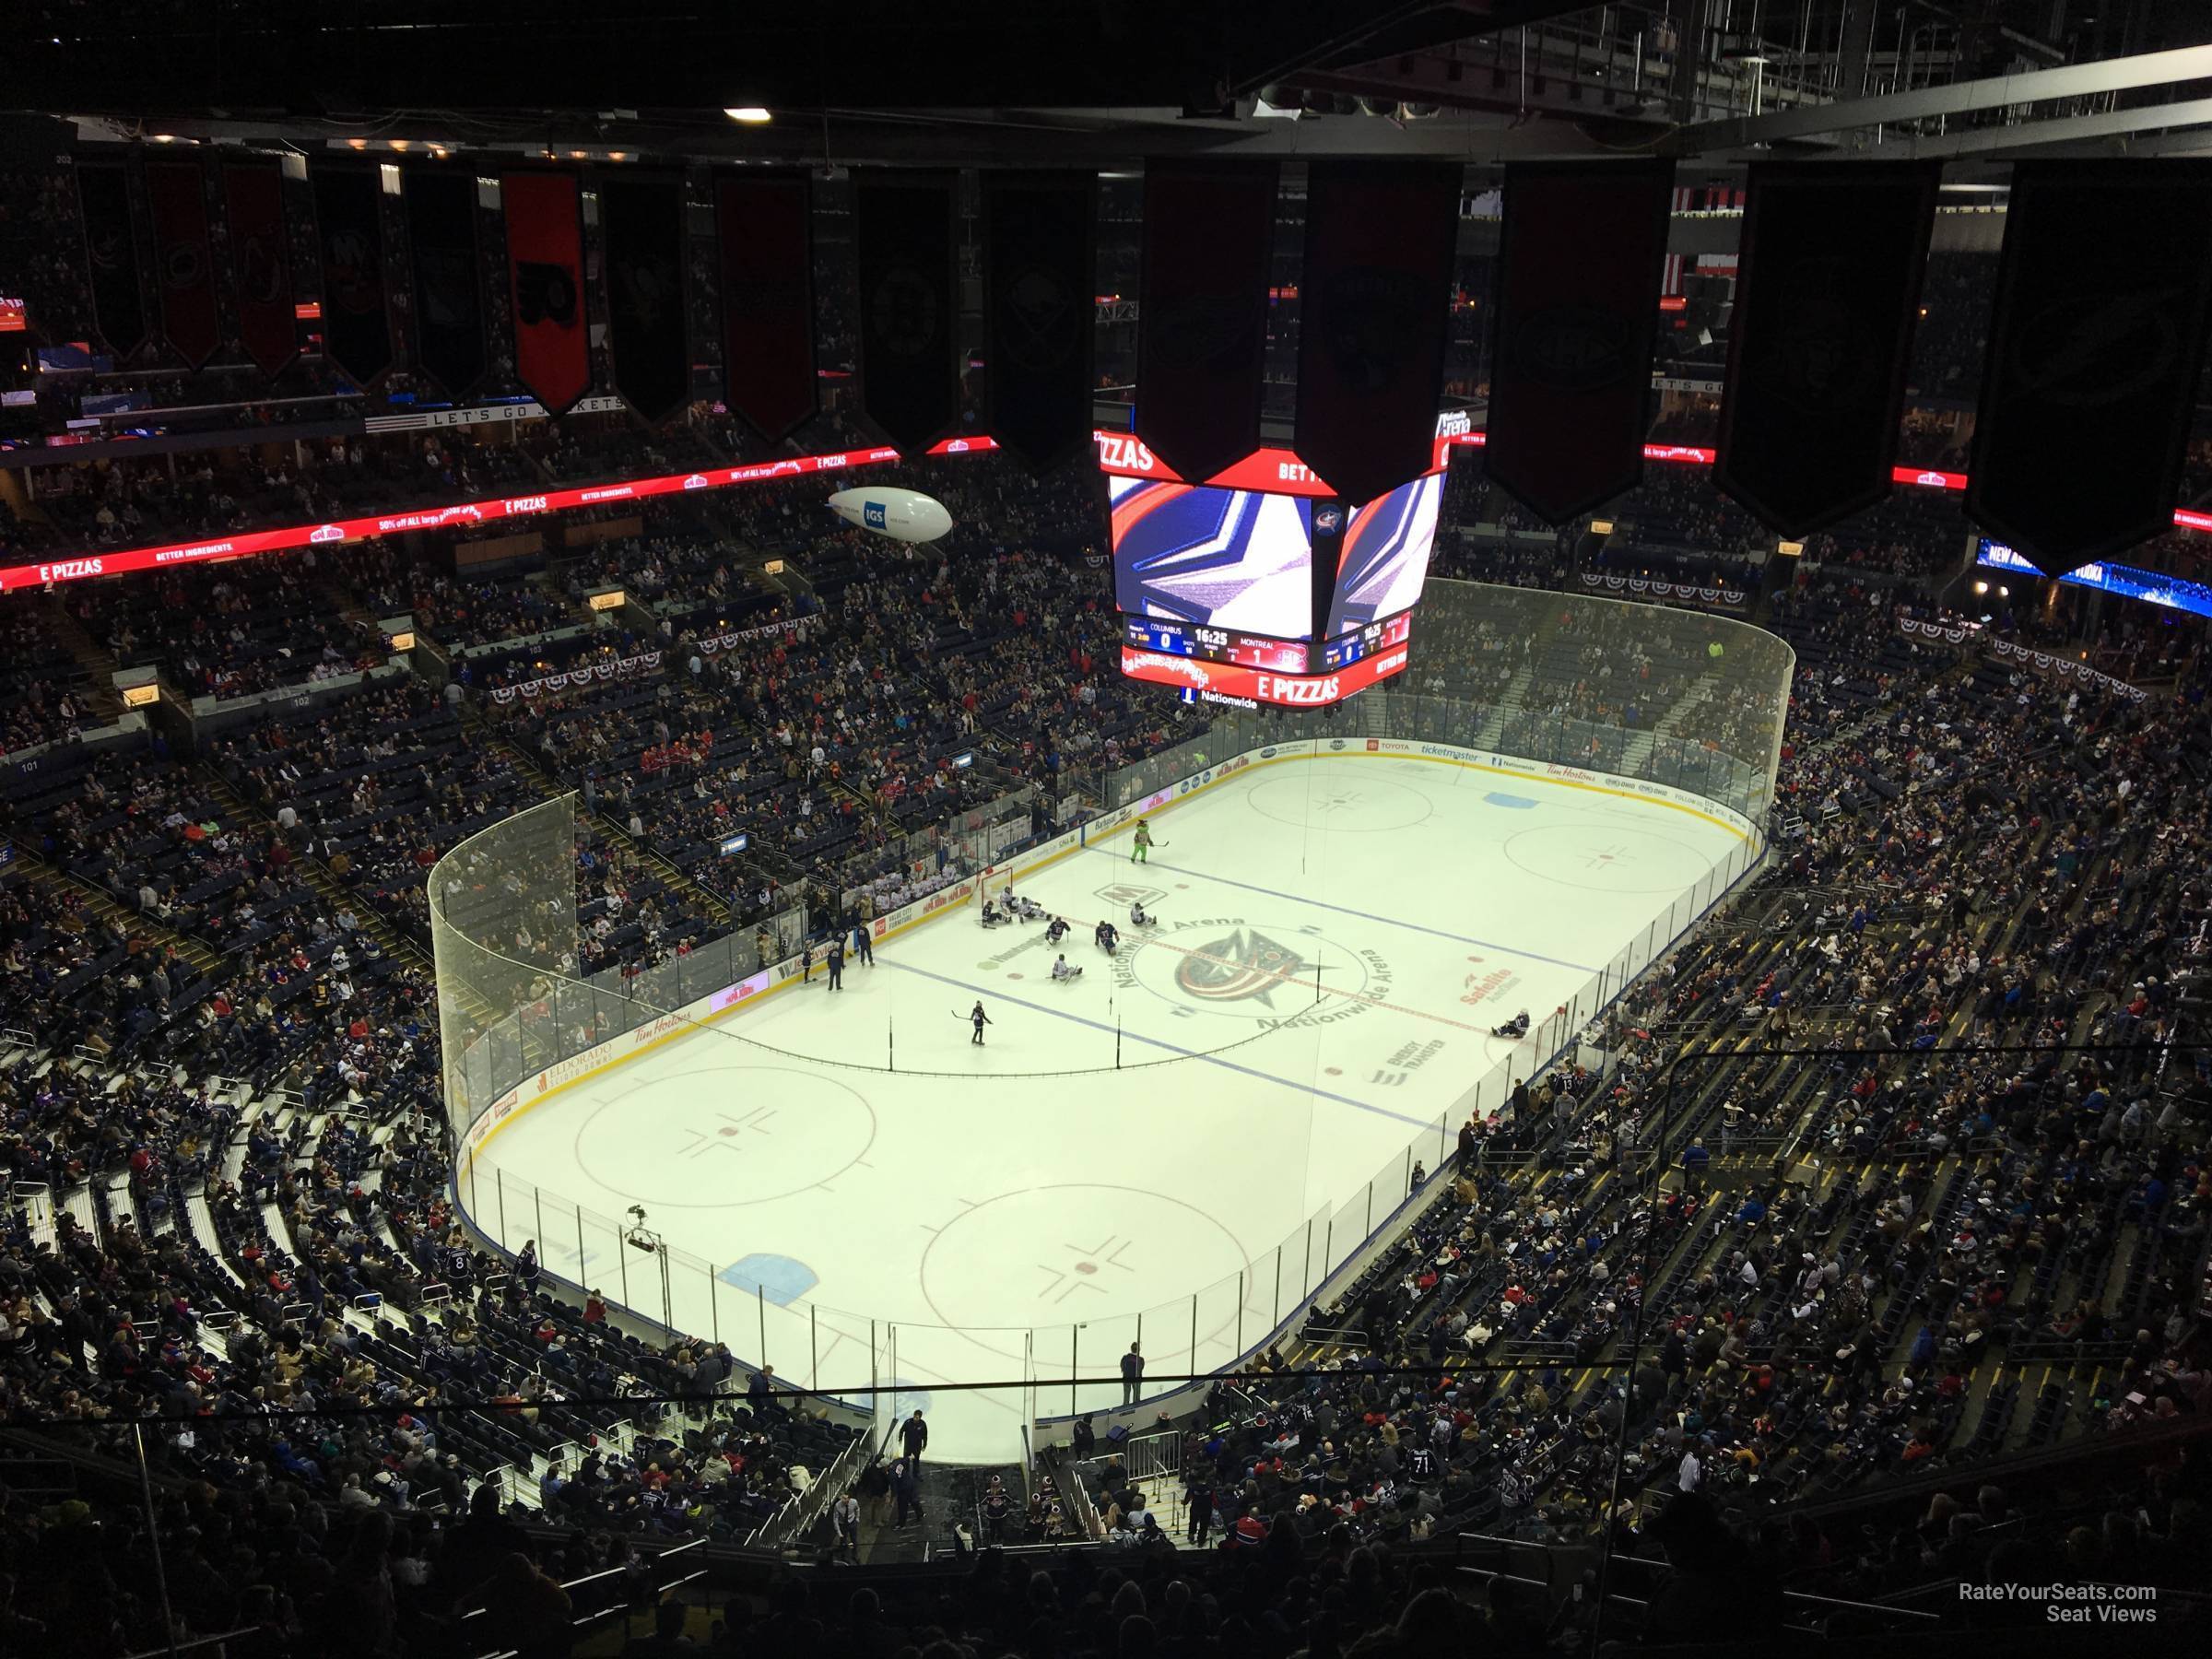 section 301, row a seat view  for hockey - nationwide arena